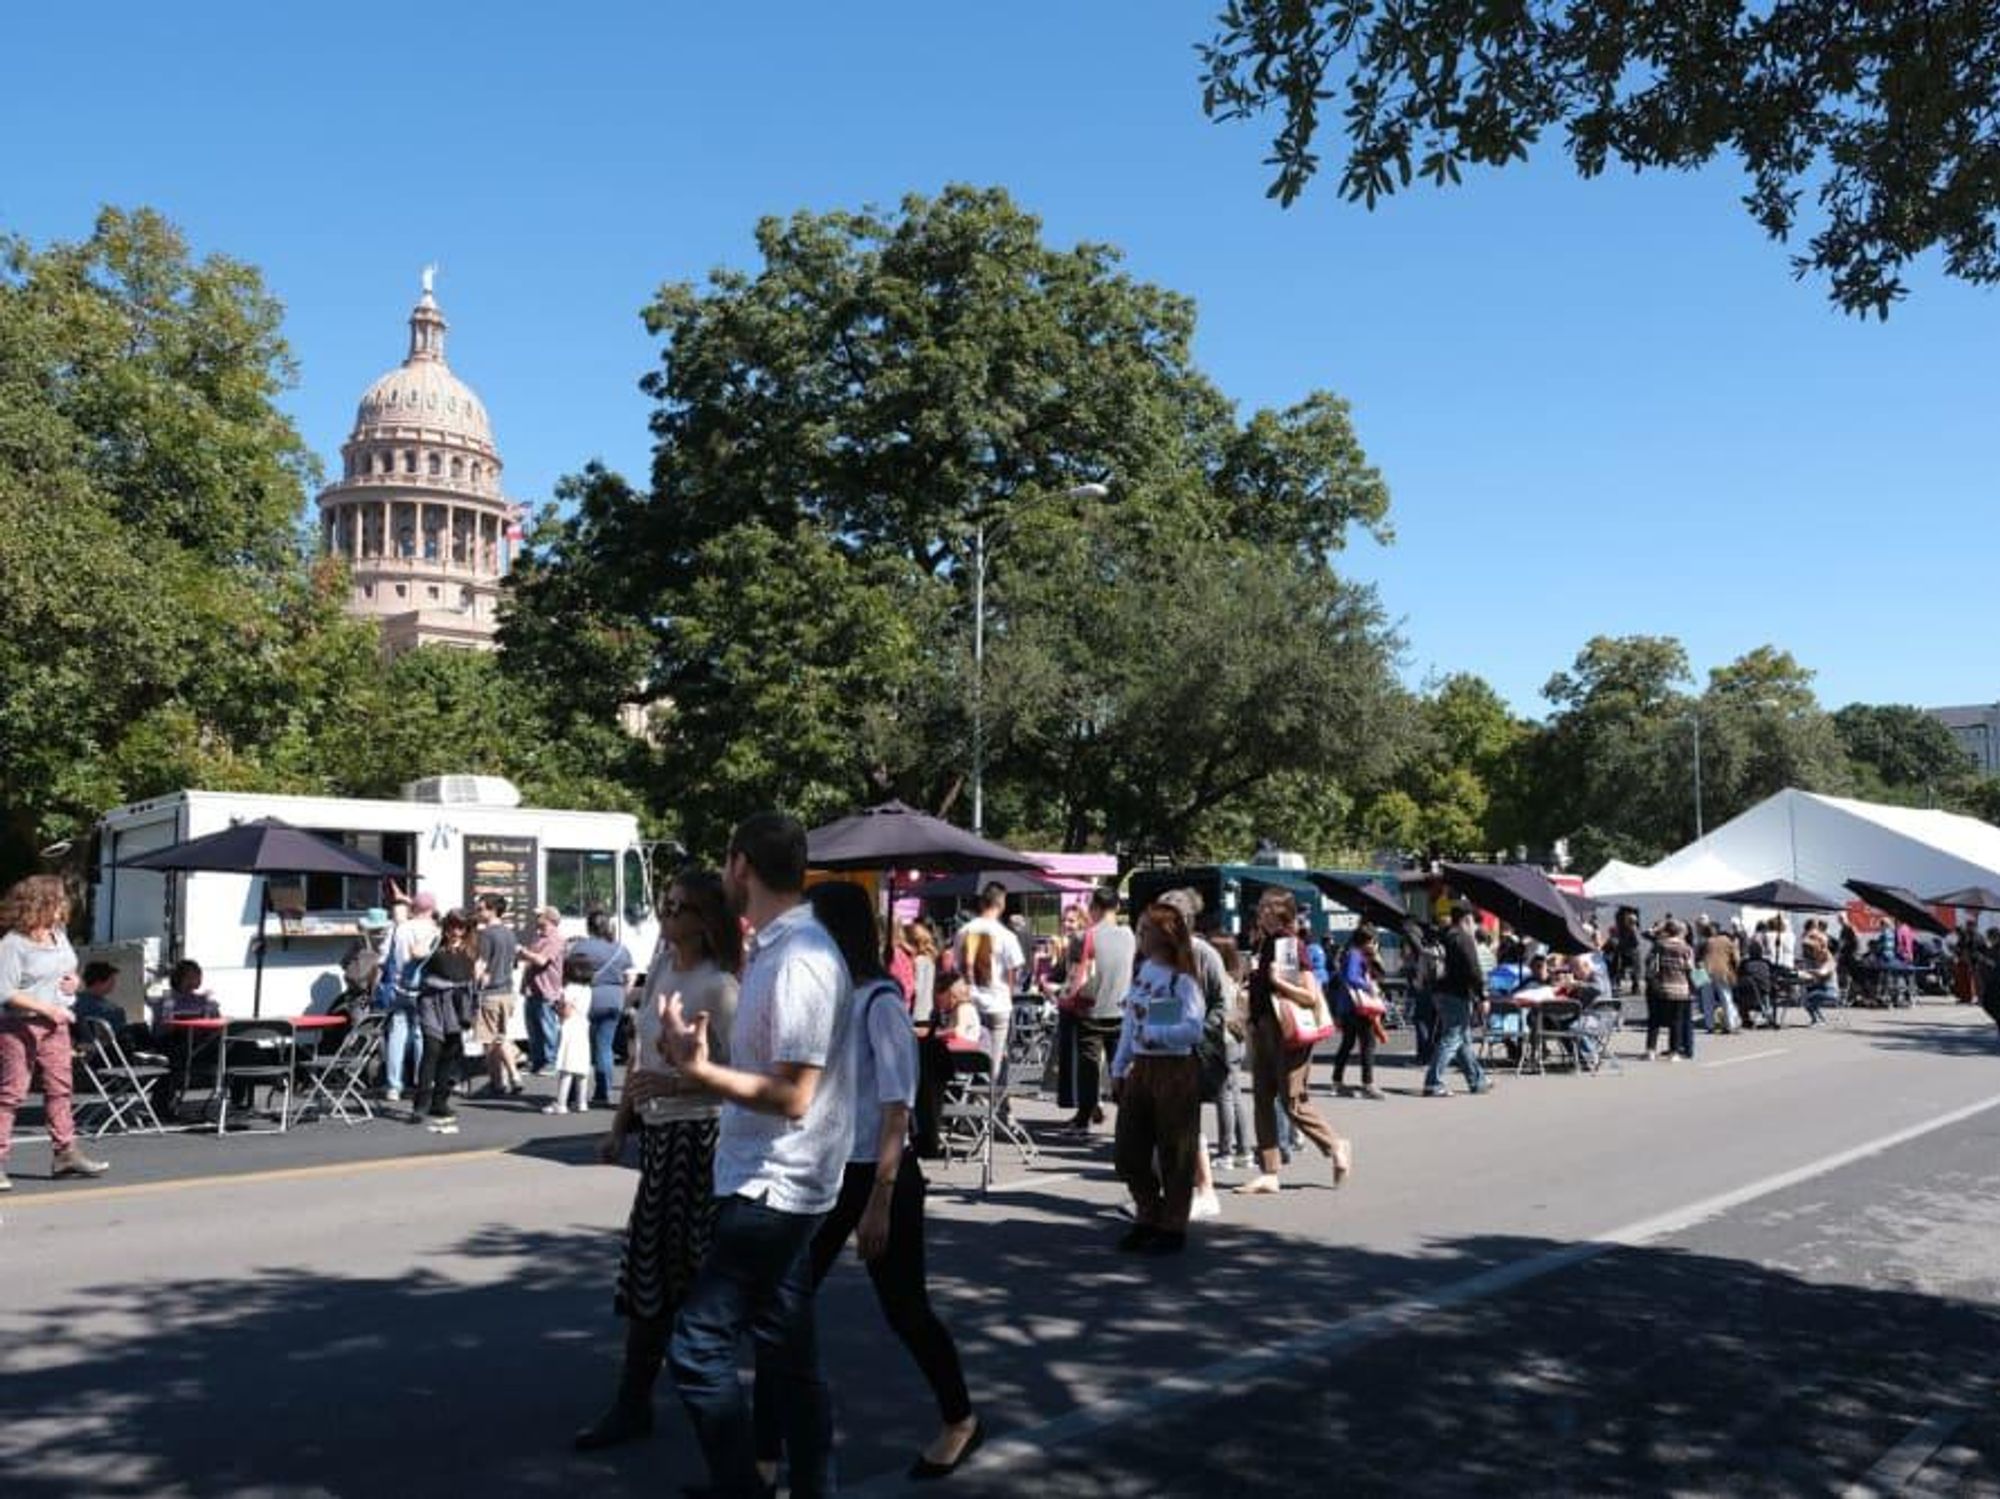 Beloved Texas Book Festival reveals star author lineup for 2022